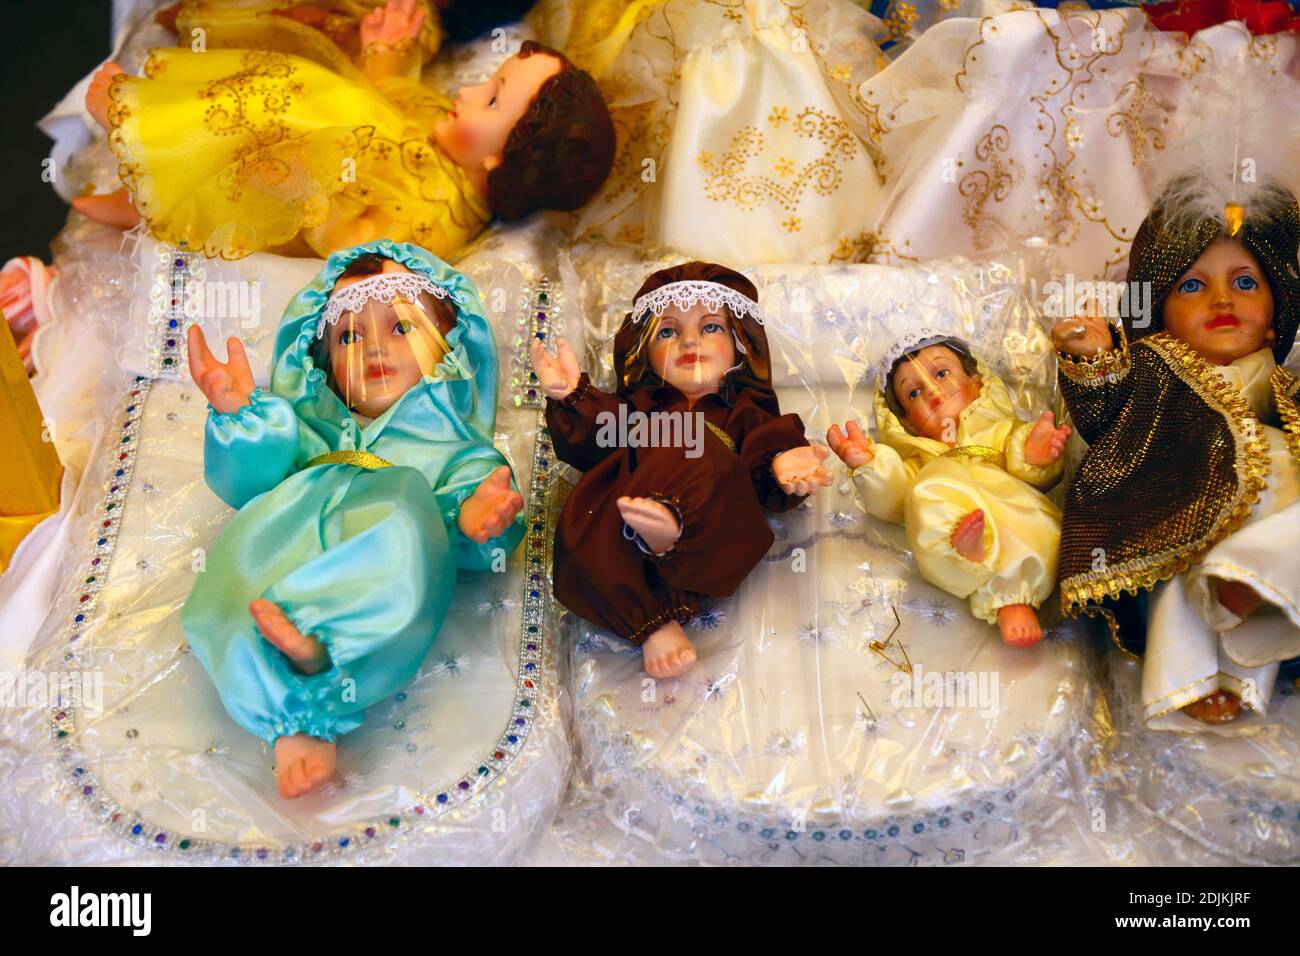 14th December 2020, LA PAZ, BOLIVIA: Baby Jesus figures (called Niños in Spanish) for nativity scenes wearing face masks and protective clothing against the covid 19 coronavirus on sale in a Christmas market. Nativity scenes are an important Christmas decoration in houses and public places in Latin America, and also Spain (where the tradition comes from).  Large numbers of figurines for nativity scenes are sold in Christmas markets; niños wearing protection against the covid 19 coronavirus are a new option this year alongside traditionally dressed niños as a result of the pandemic. Stock Photo